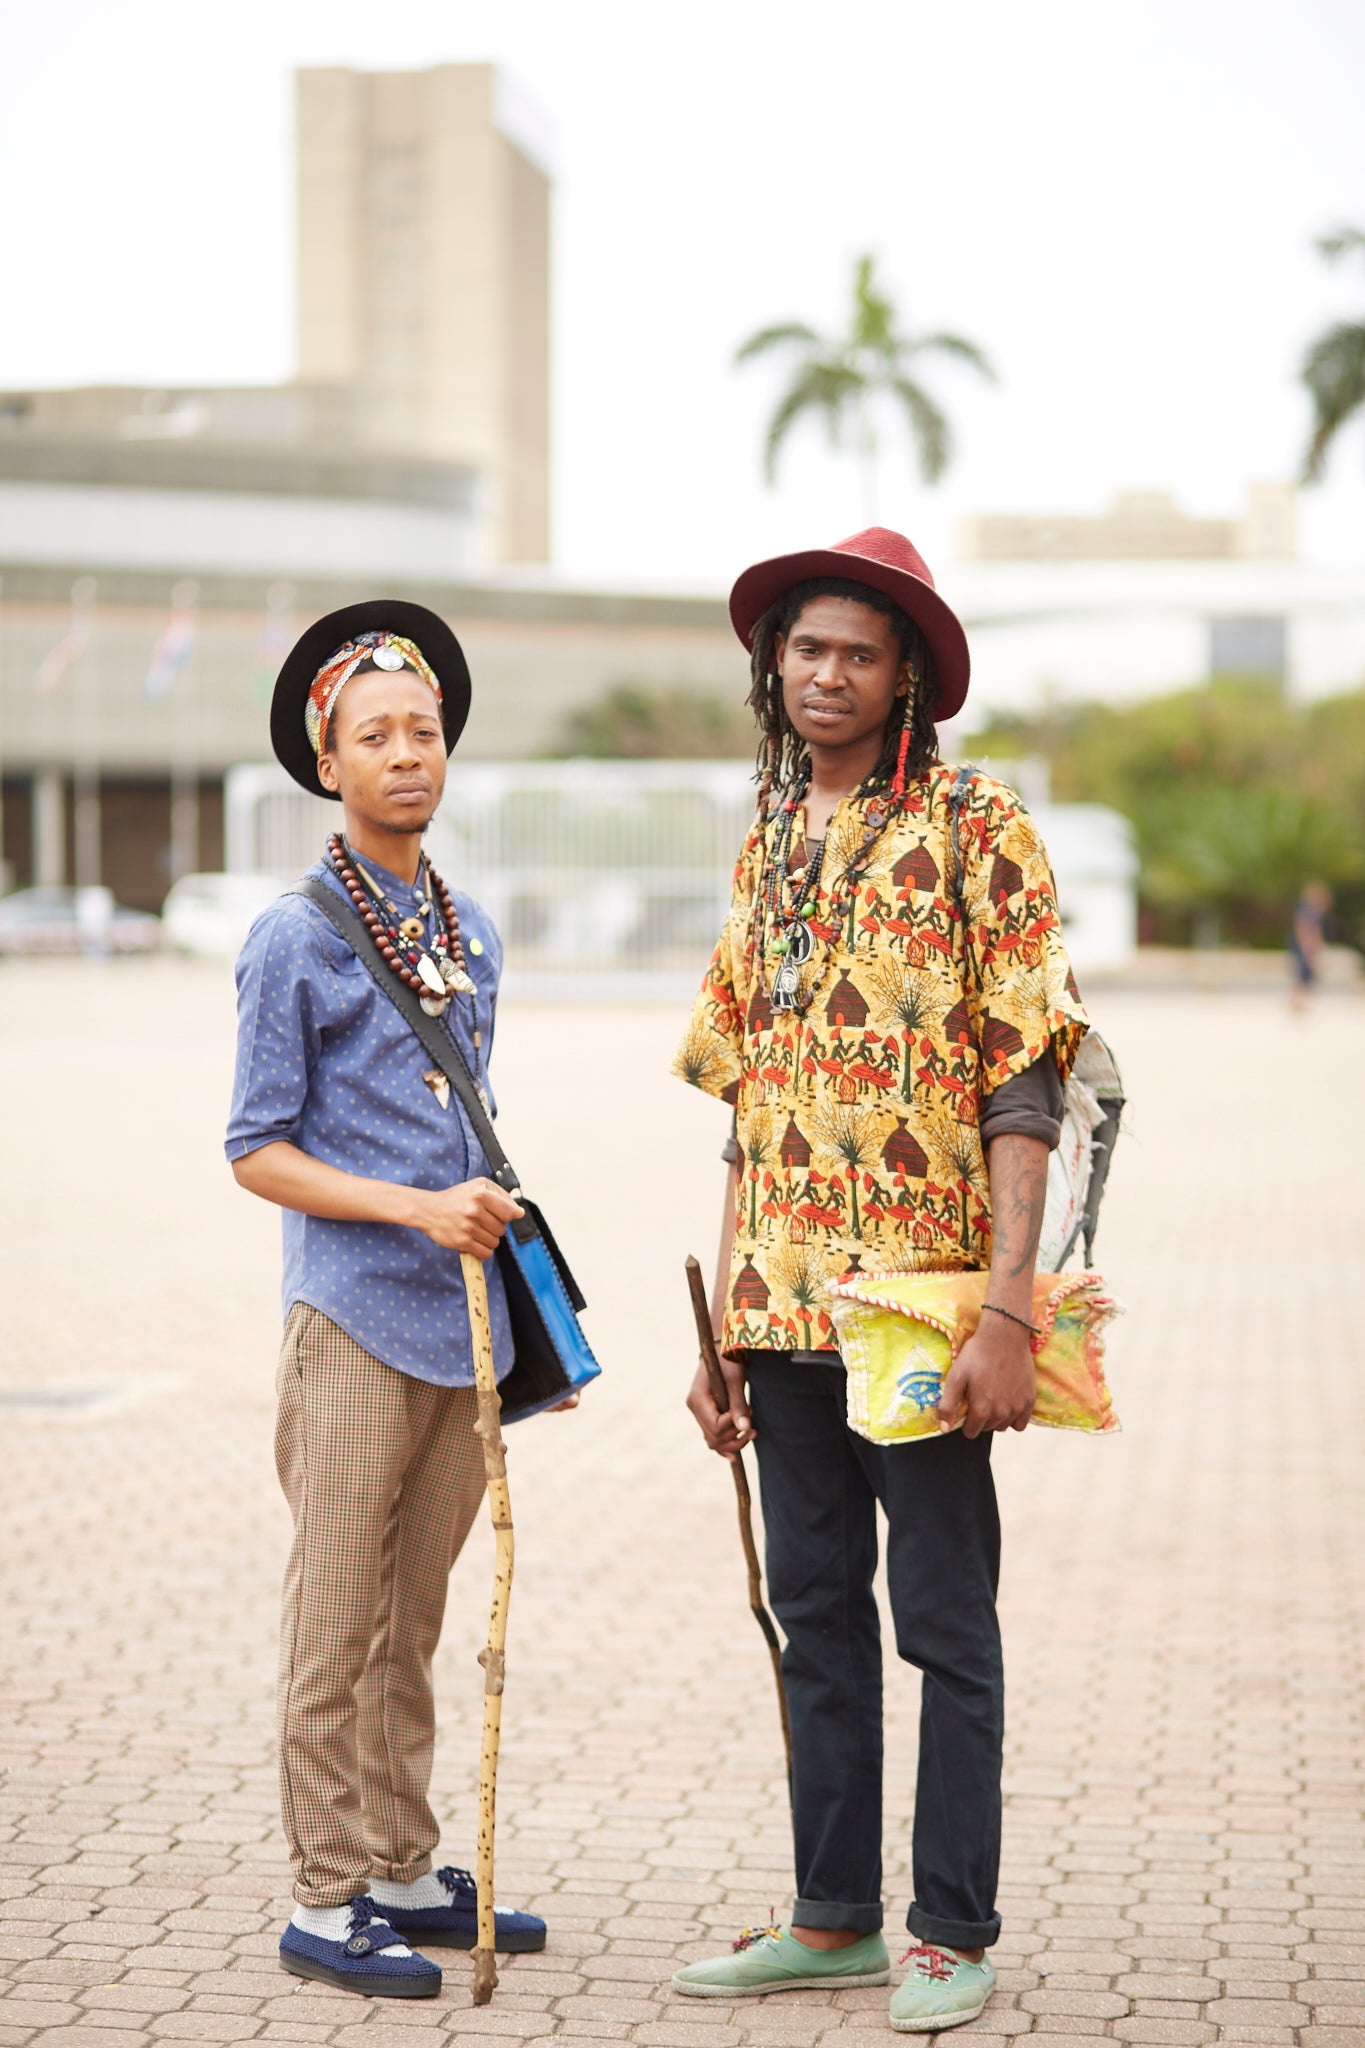 The Best Street Style Looks From ESSENCE Fest Durban
